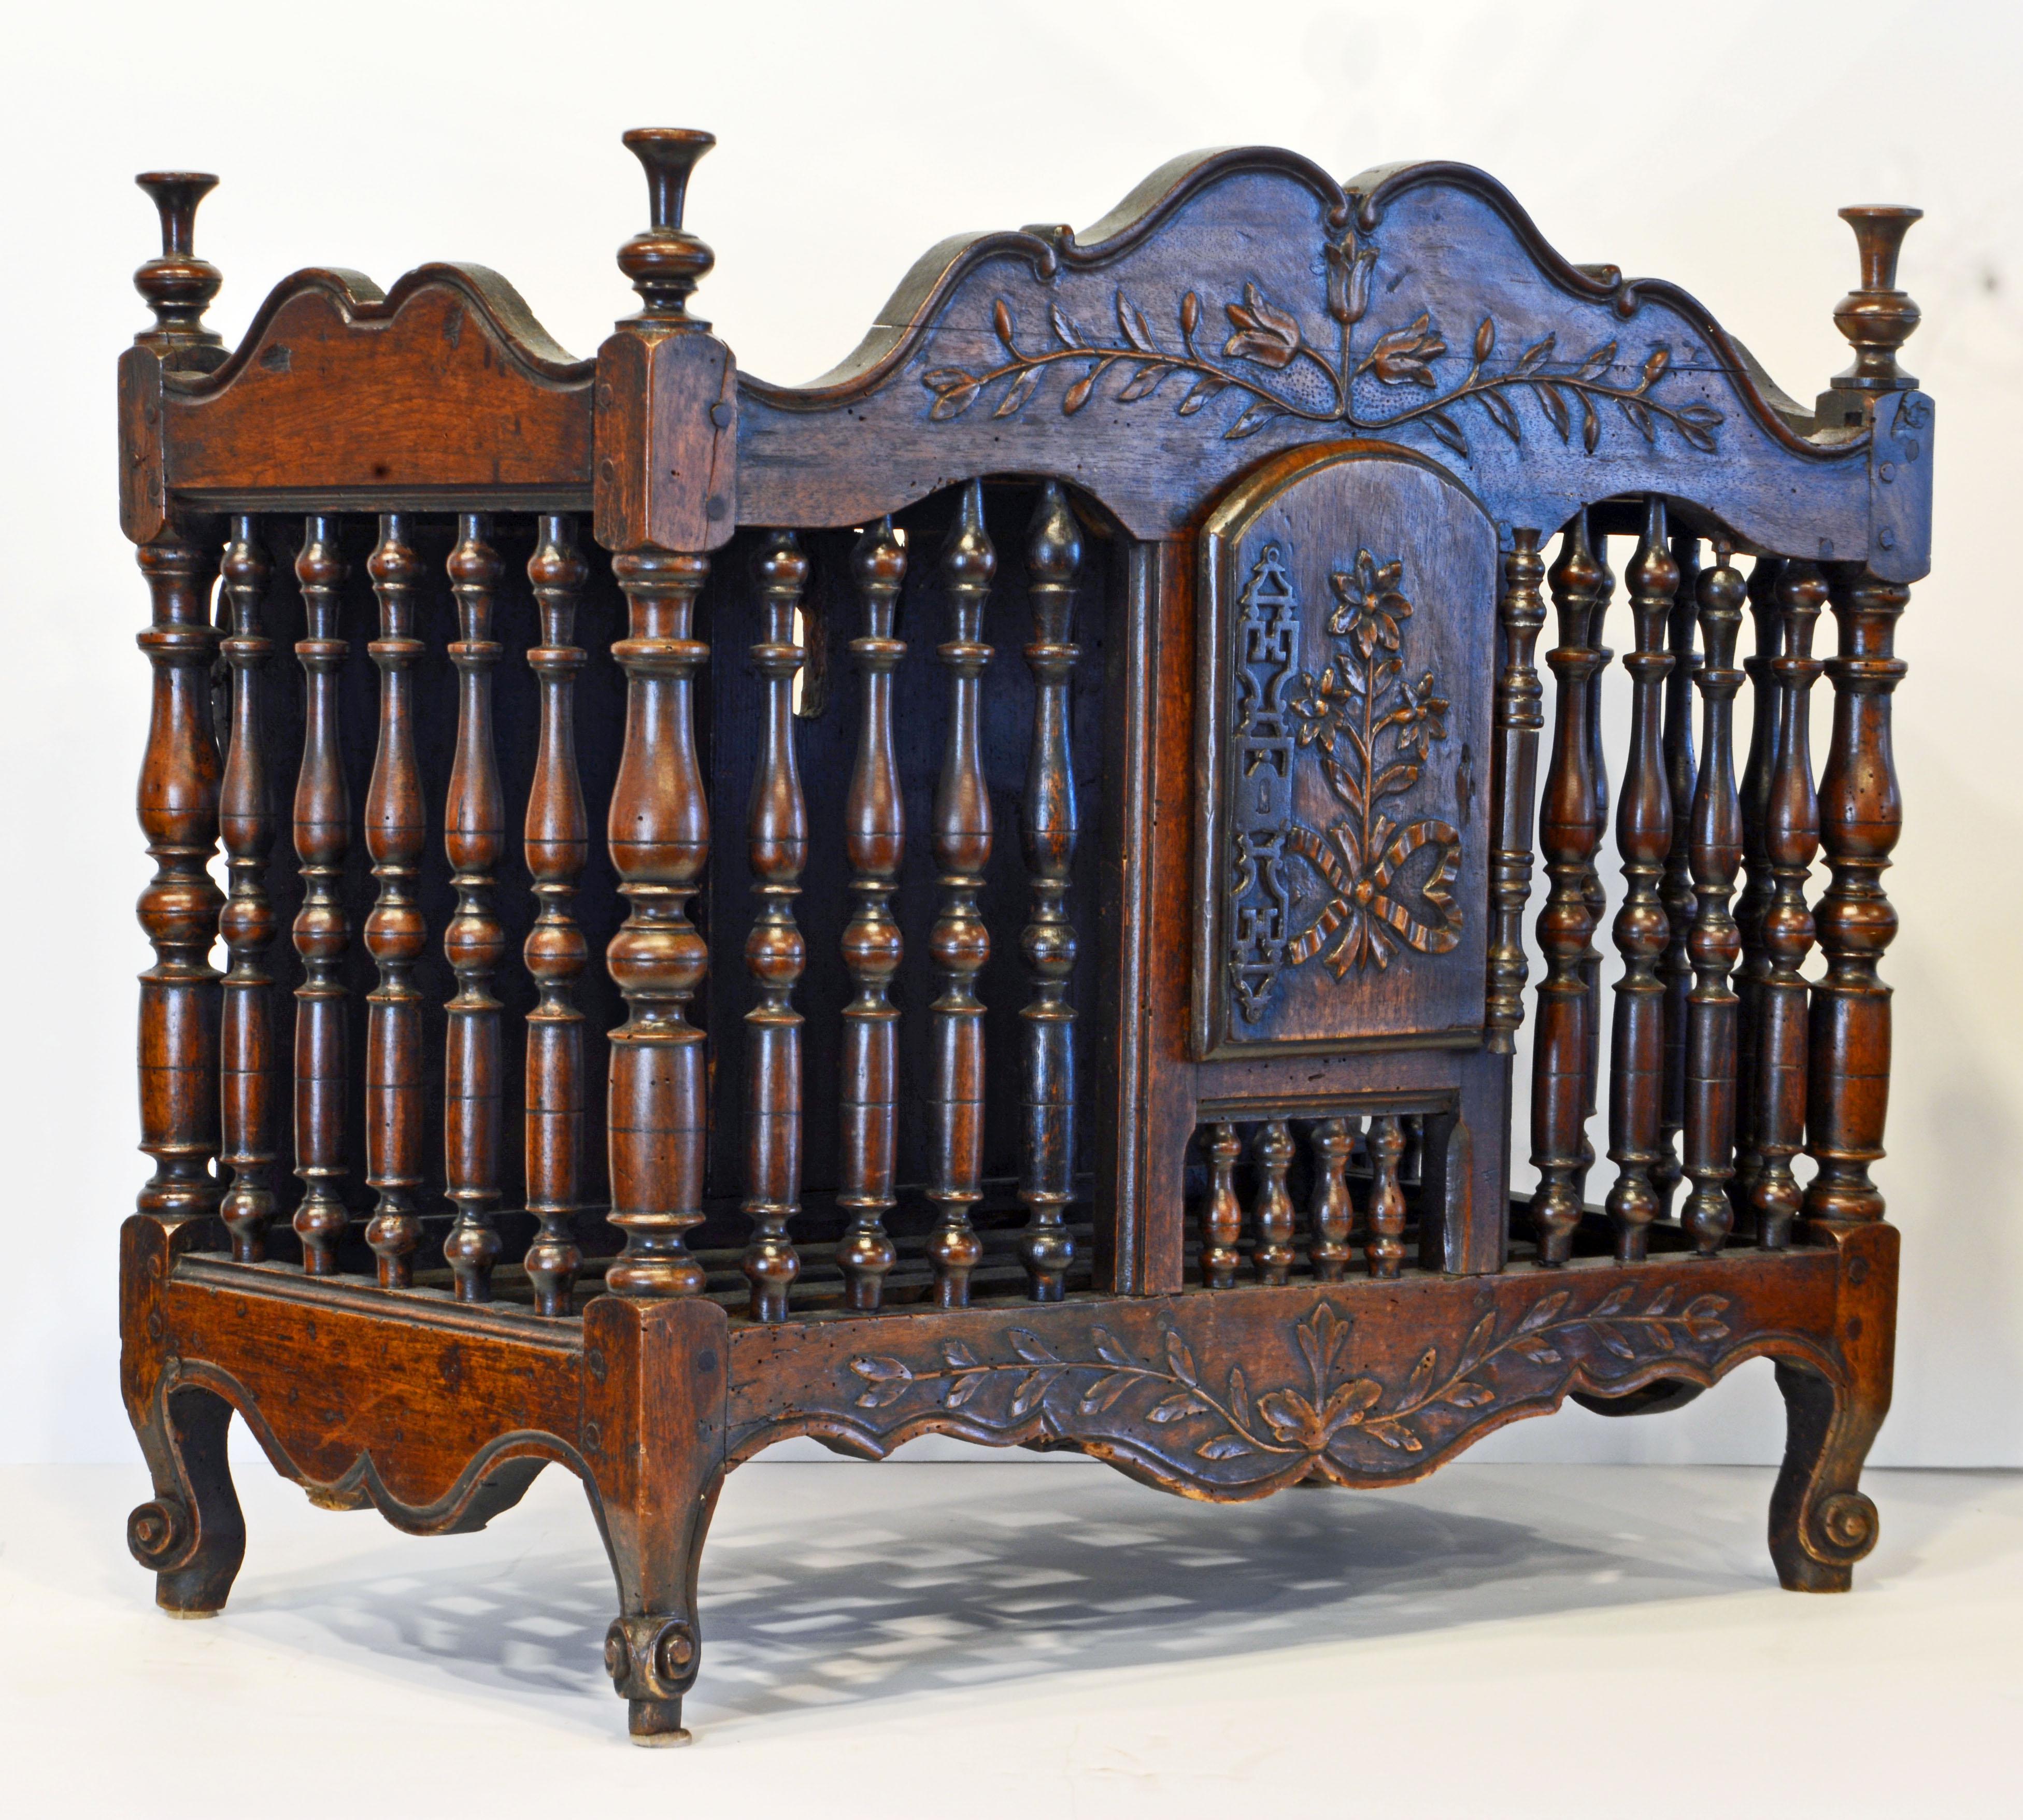 This fine late 18th century French Provincial walnut panetiere features a top with turned finials accenting the corners above shaped friezes on three sides adorned by carved flowers and leaves. The front and sides are are made with turned spindles